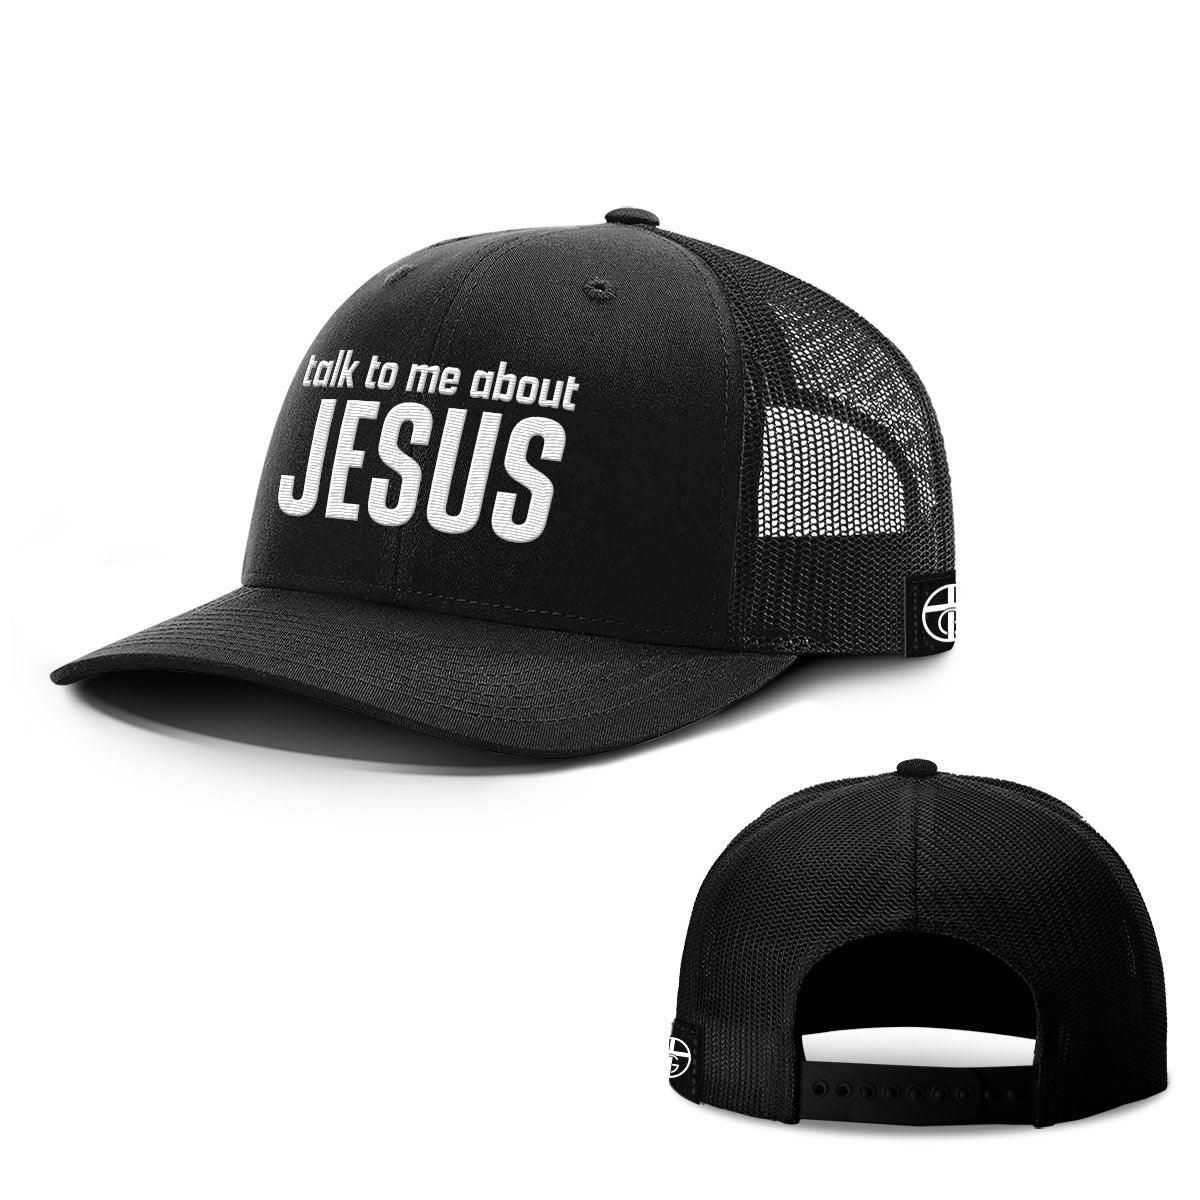 Talk To Me About JESUS Hats